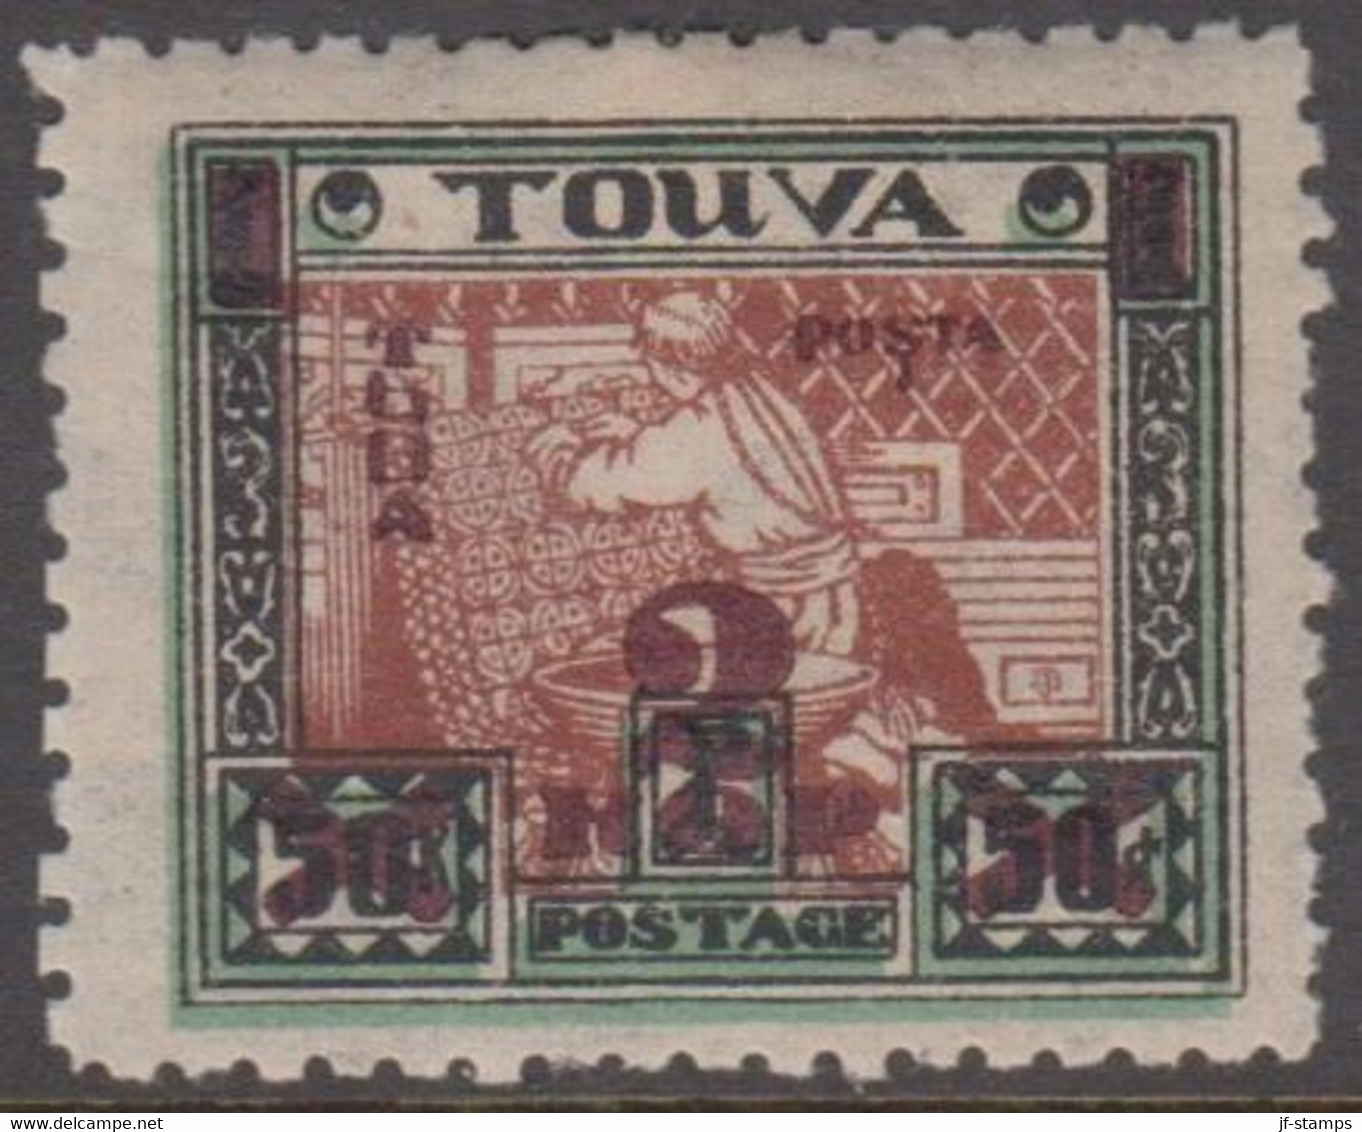 1932. POSTA TOUVA. 2 Kop On 50 K Surcharged Country Motives. Hinged.  () - JF413762 - Touva